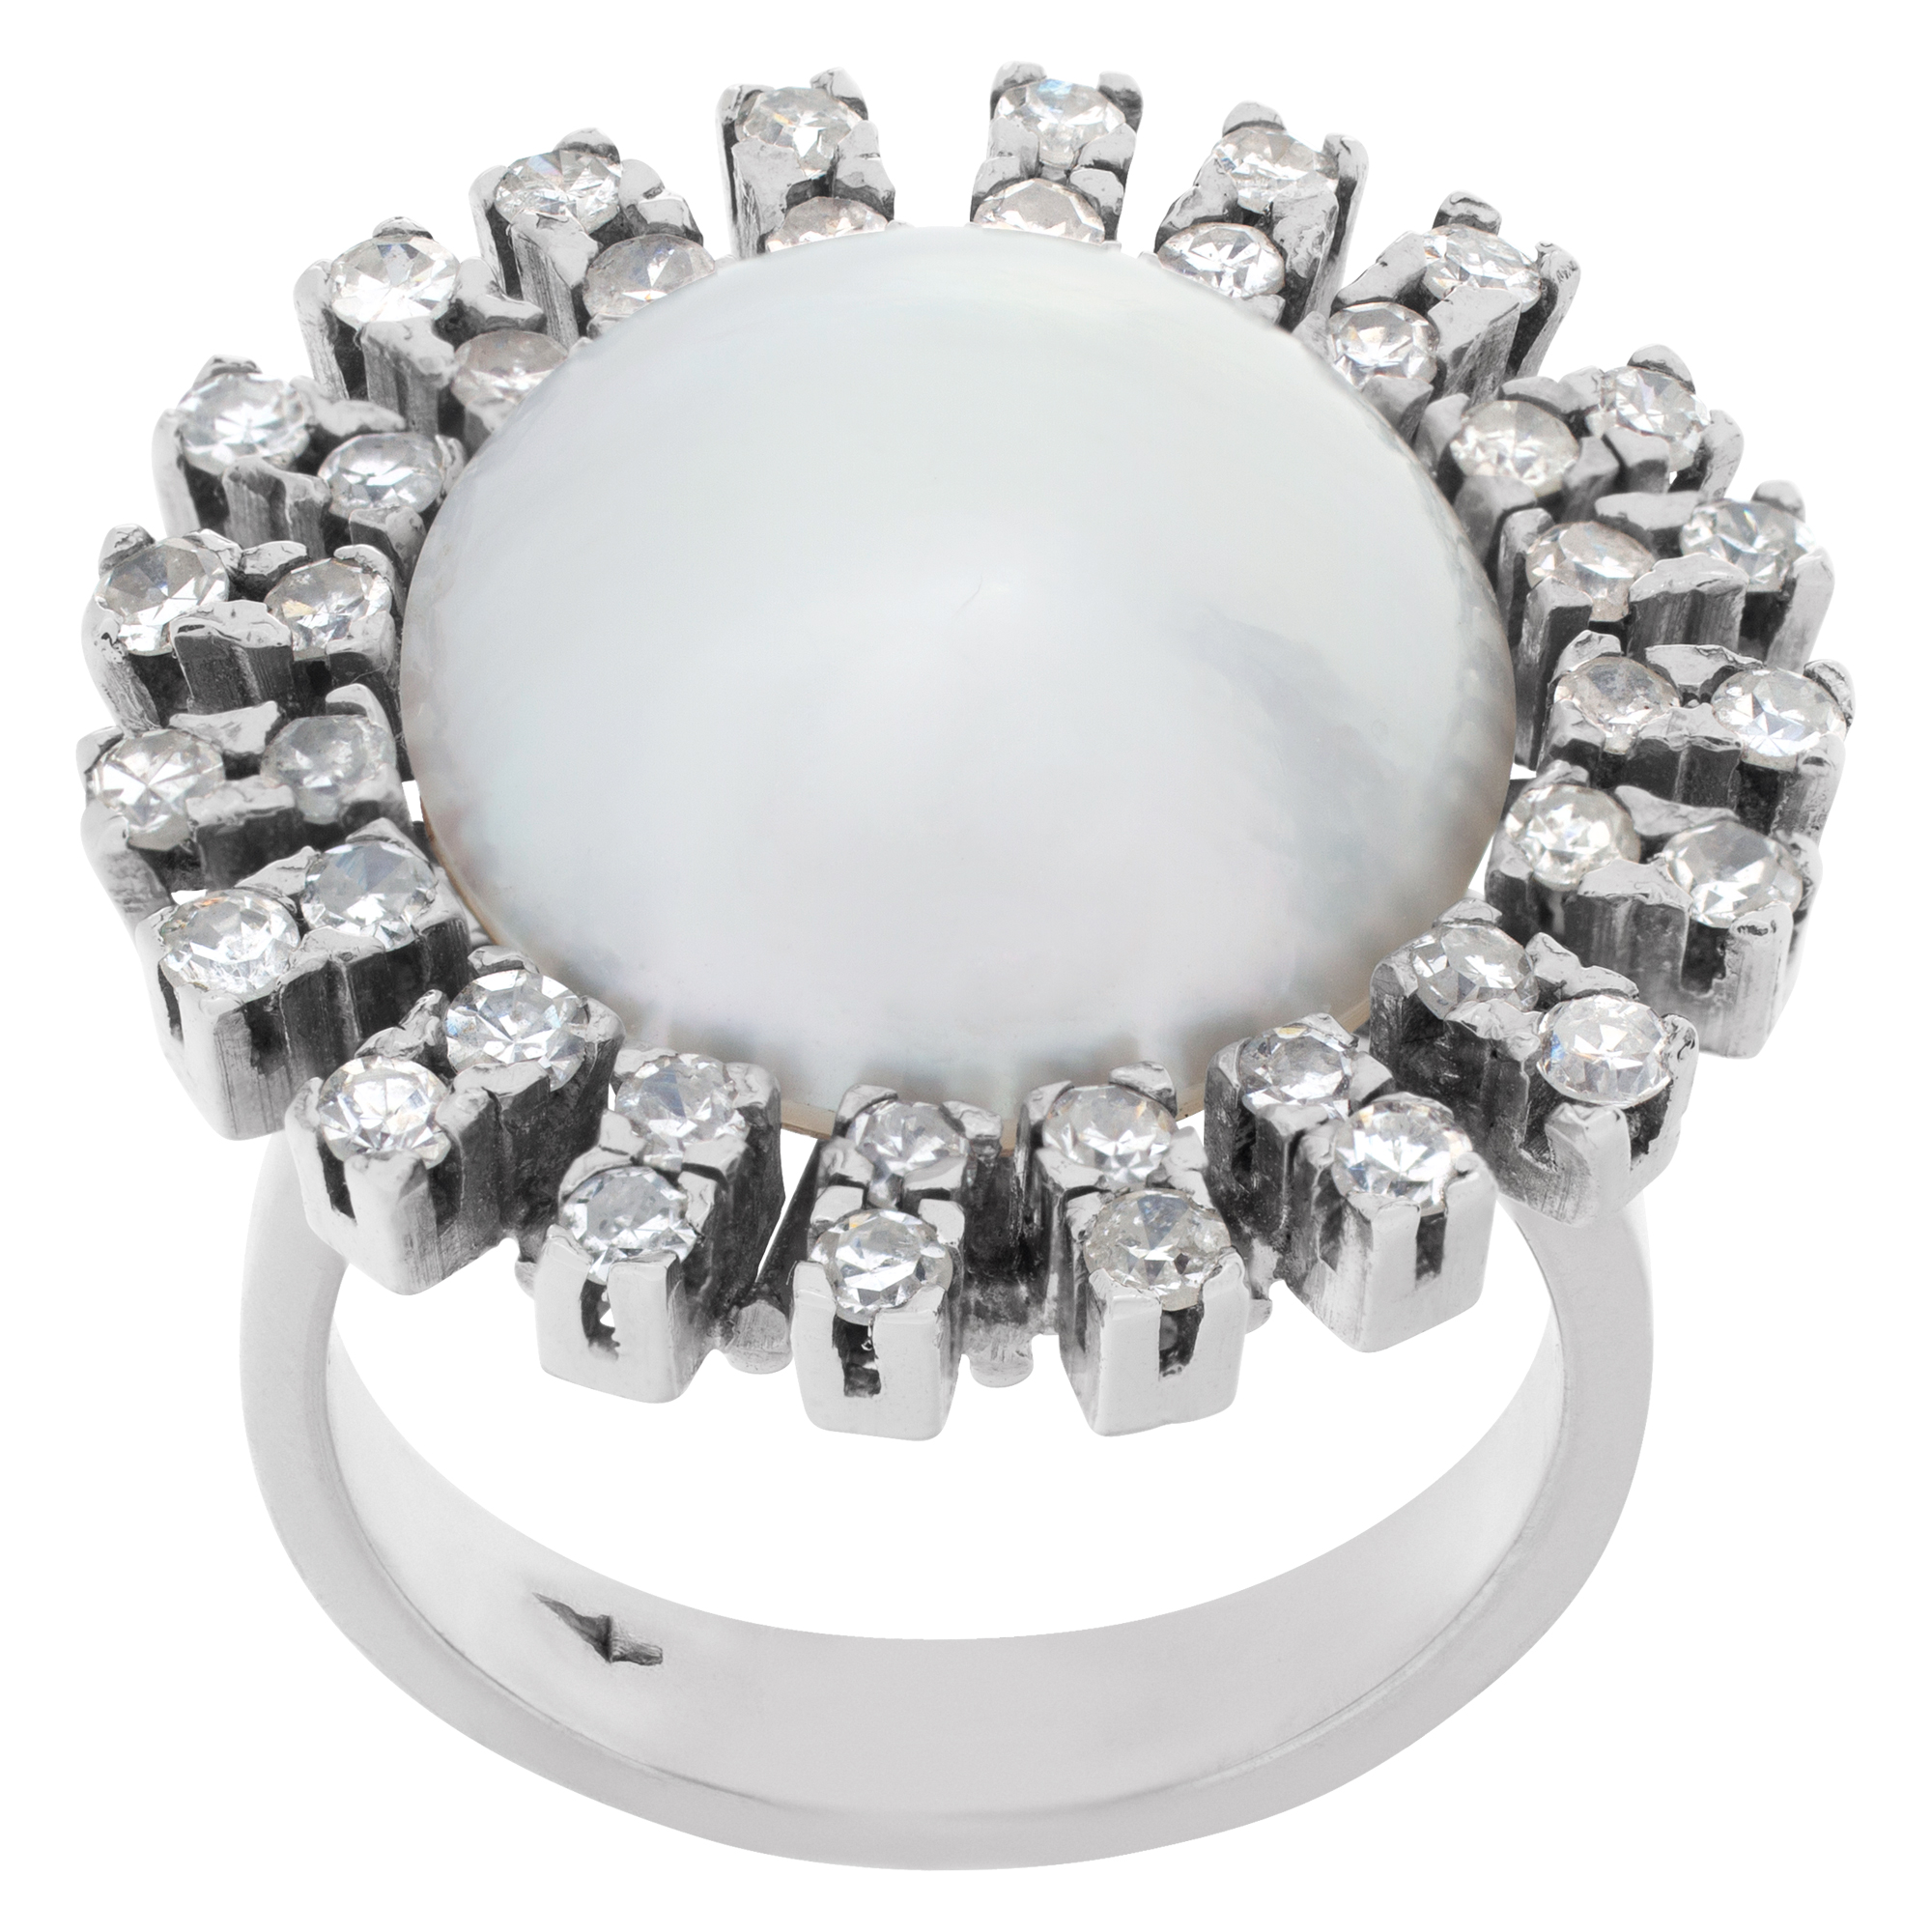 Magnificent diamond and Mobe pearl ring in 14k white gold. 0.80 cts in diamonds